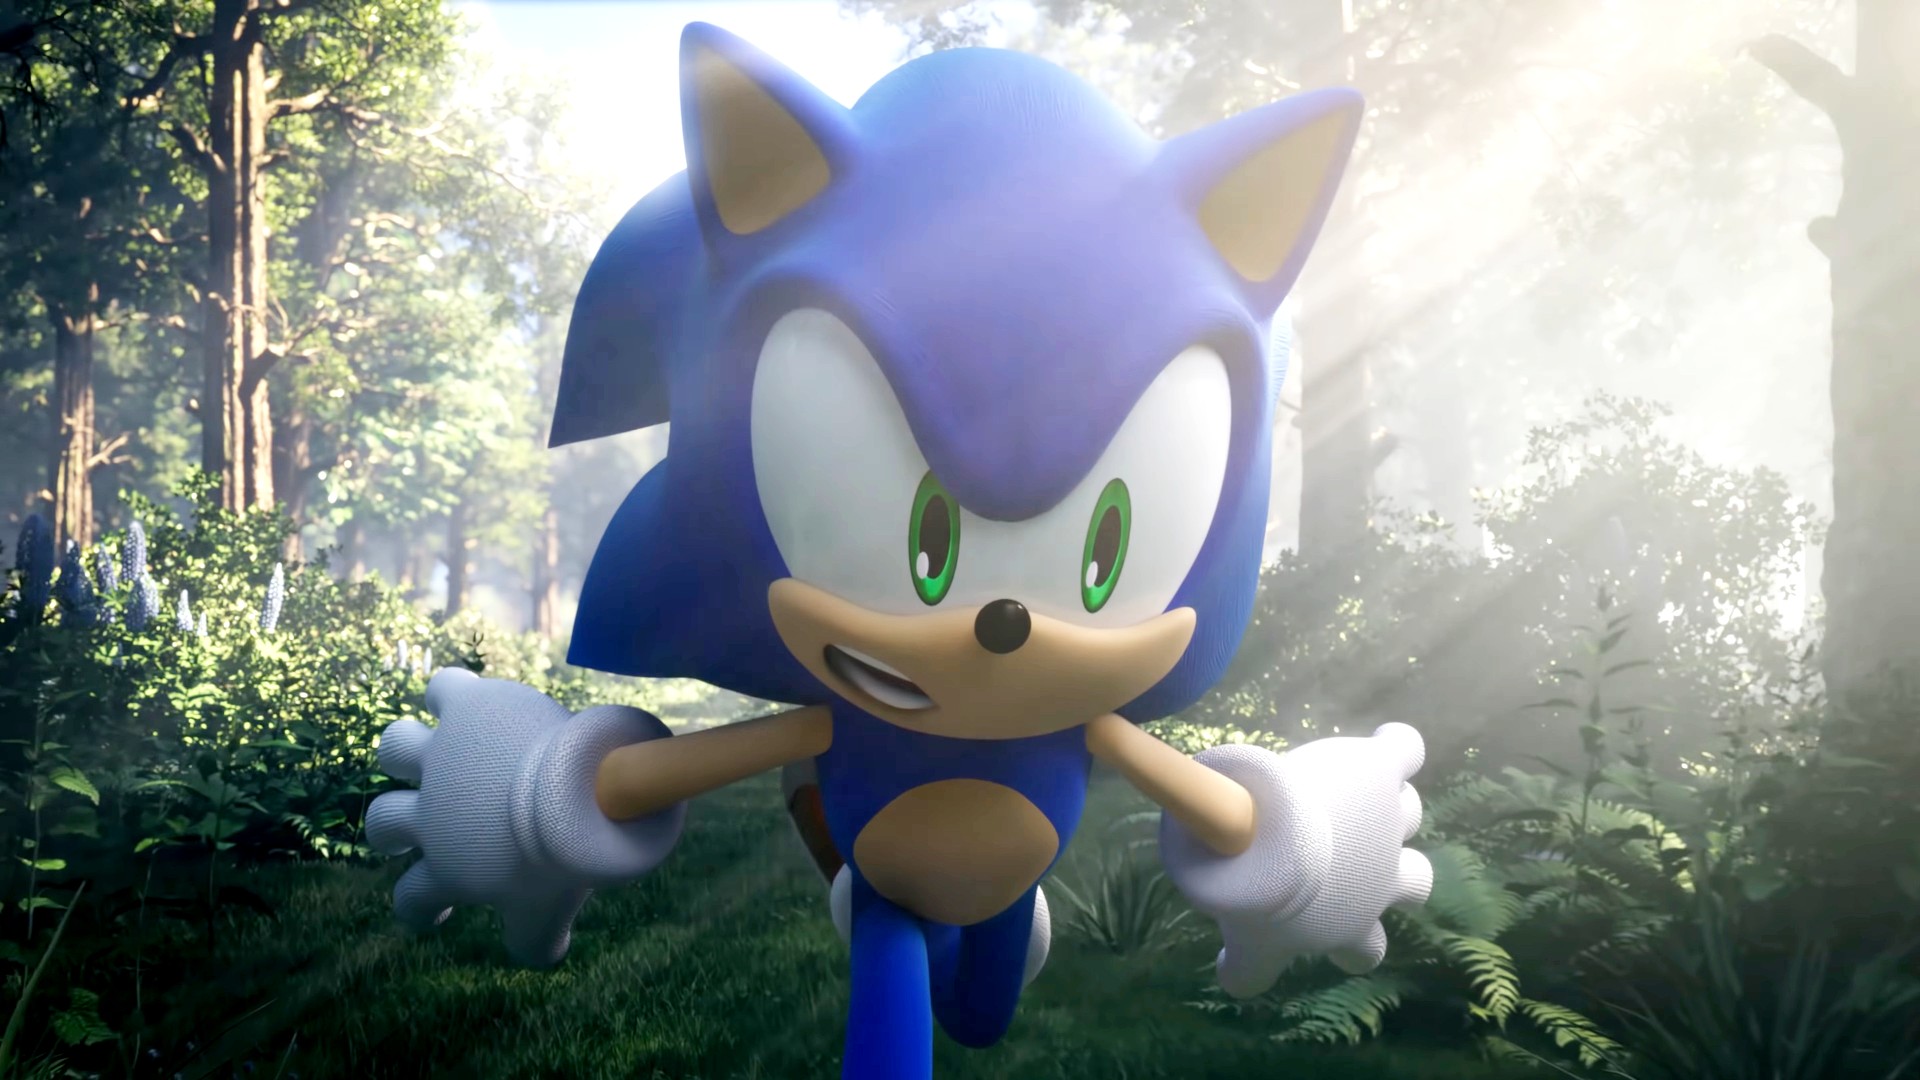 Sonic Frontiers' free DLC gets release date, classic Sonic music